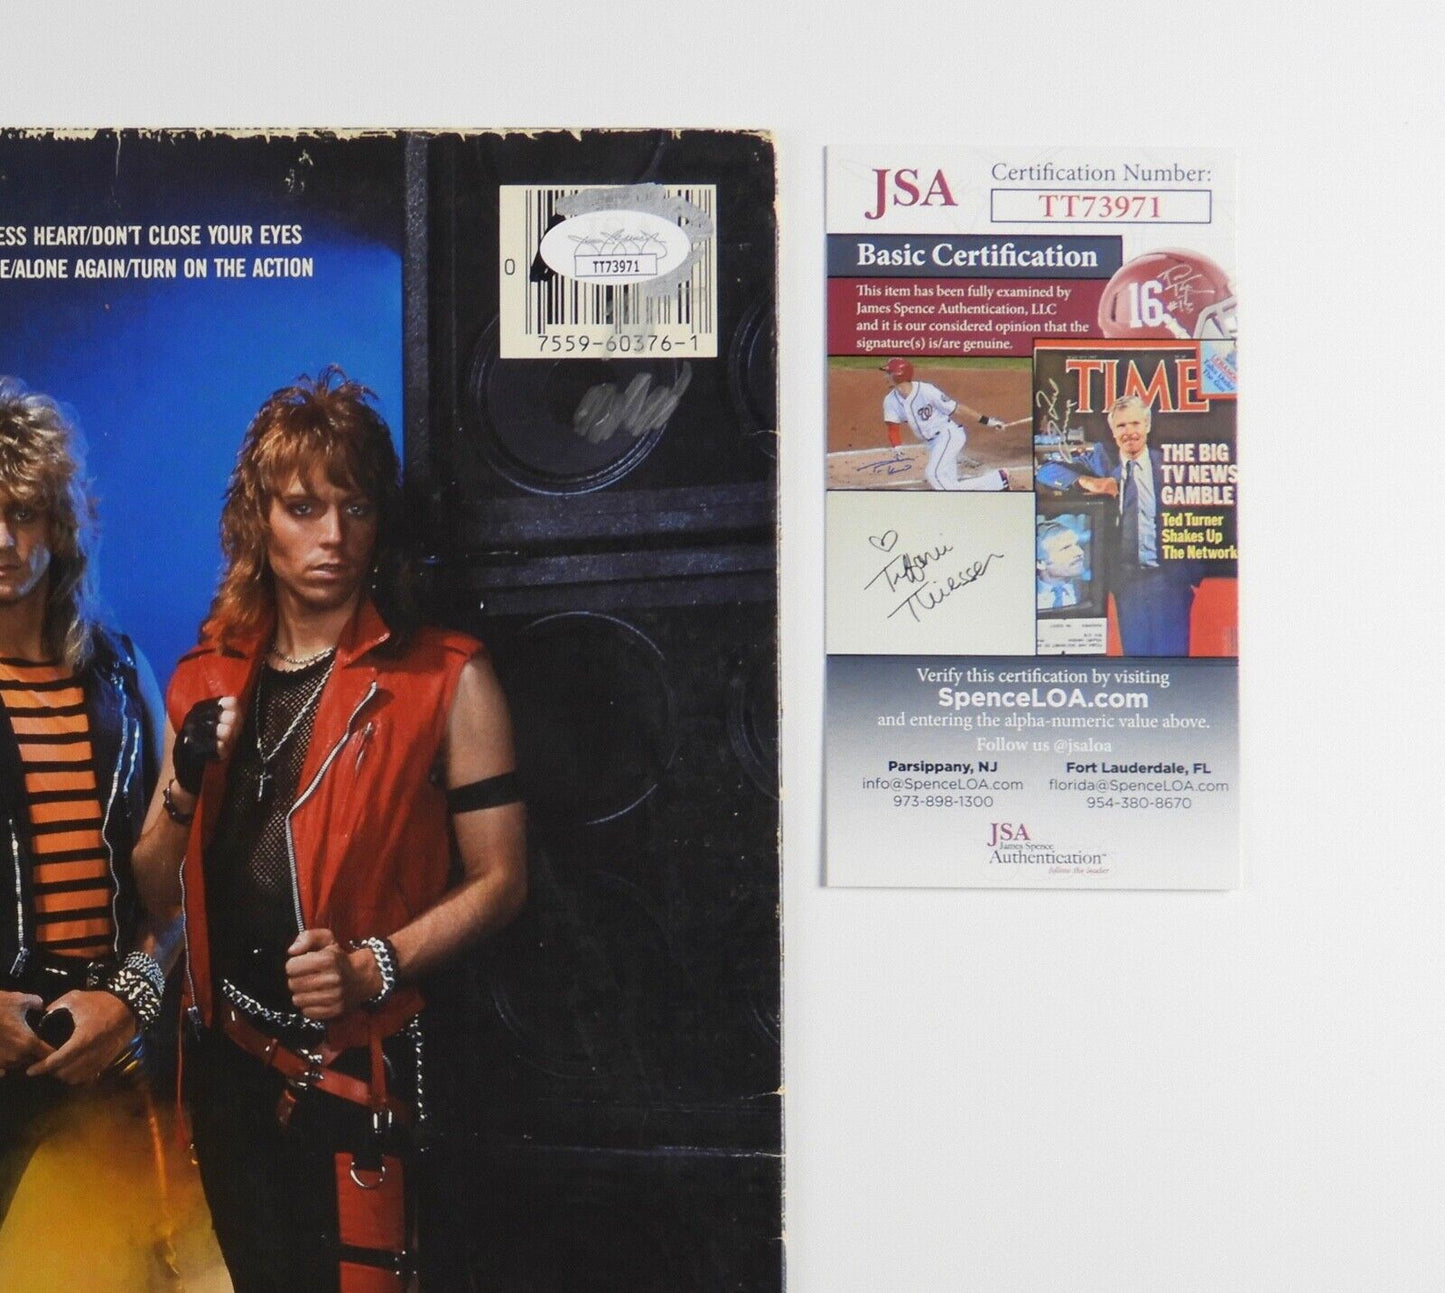 Dokken Signed Autograph JSA Record Album Vinyl Tooth And Nail